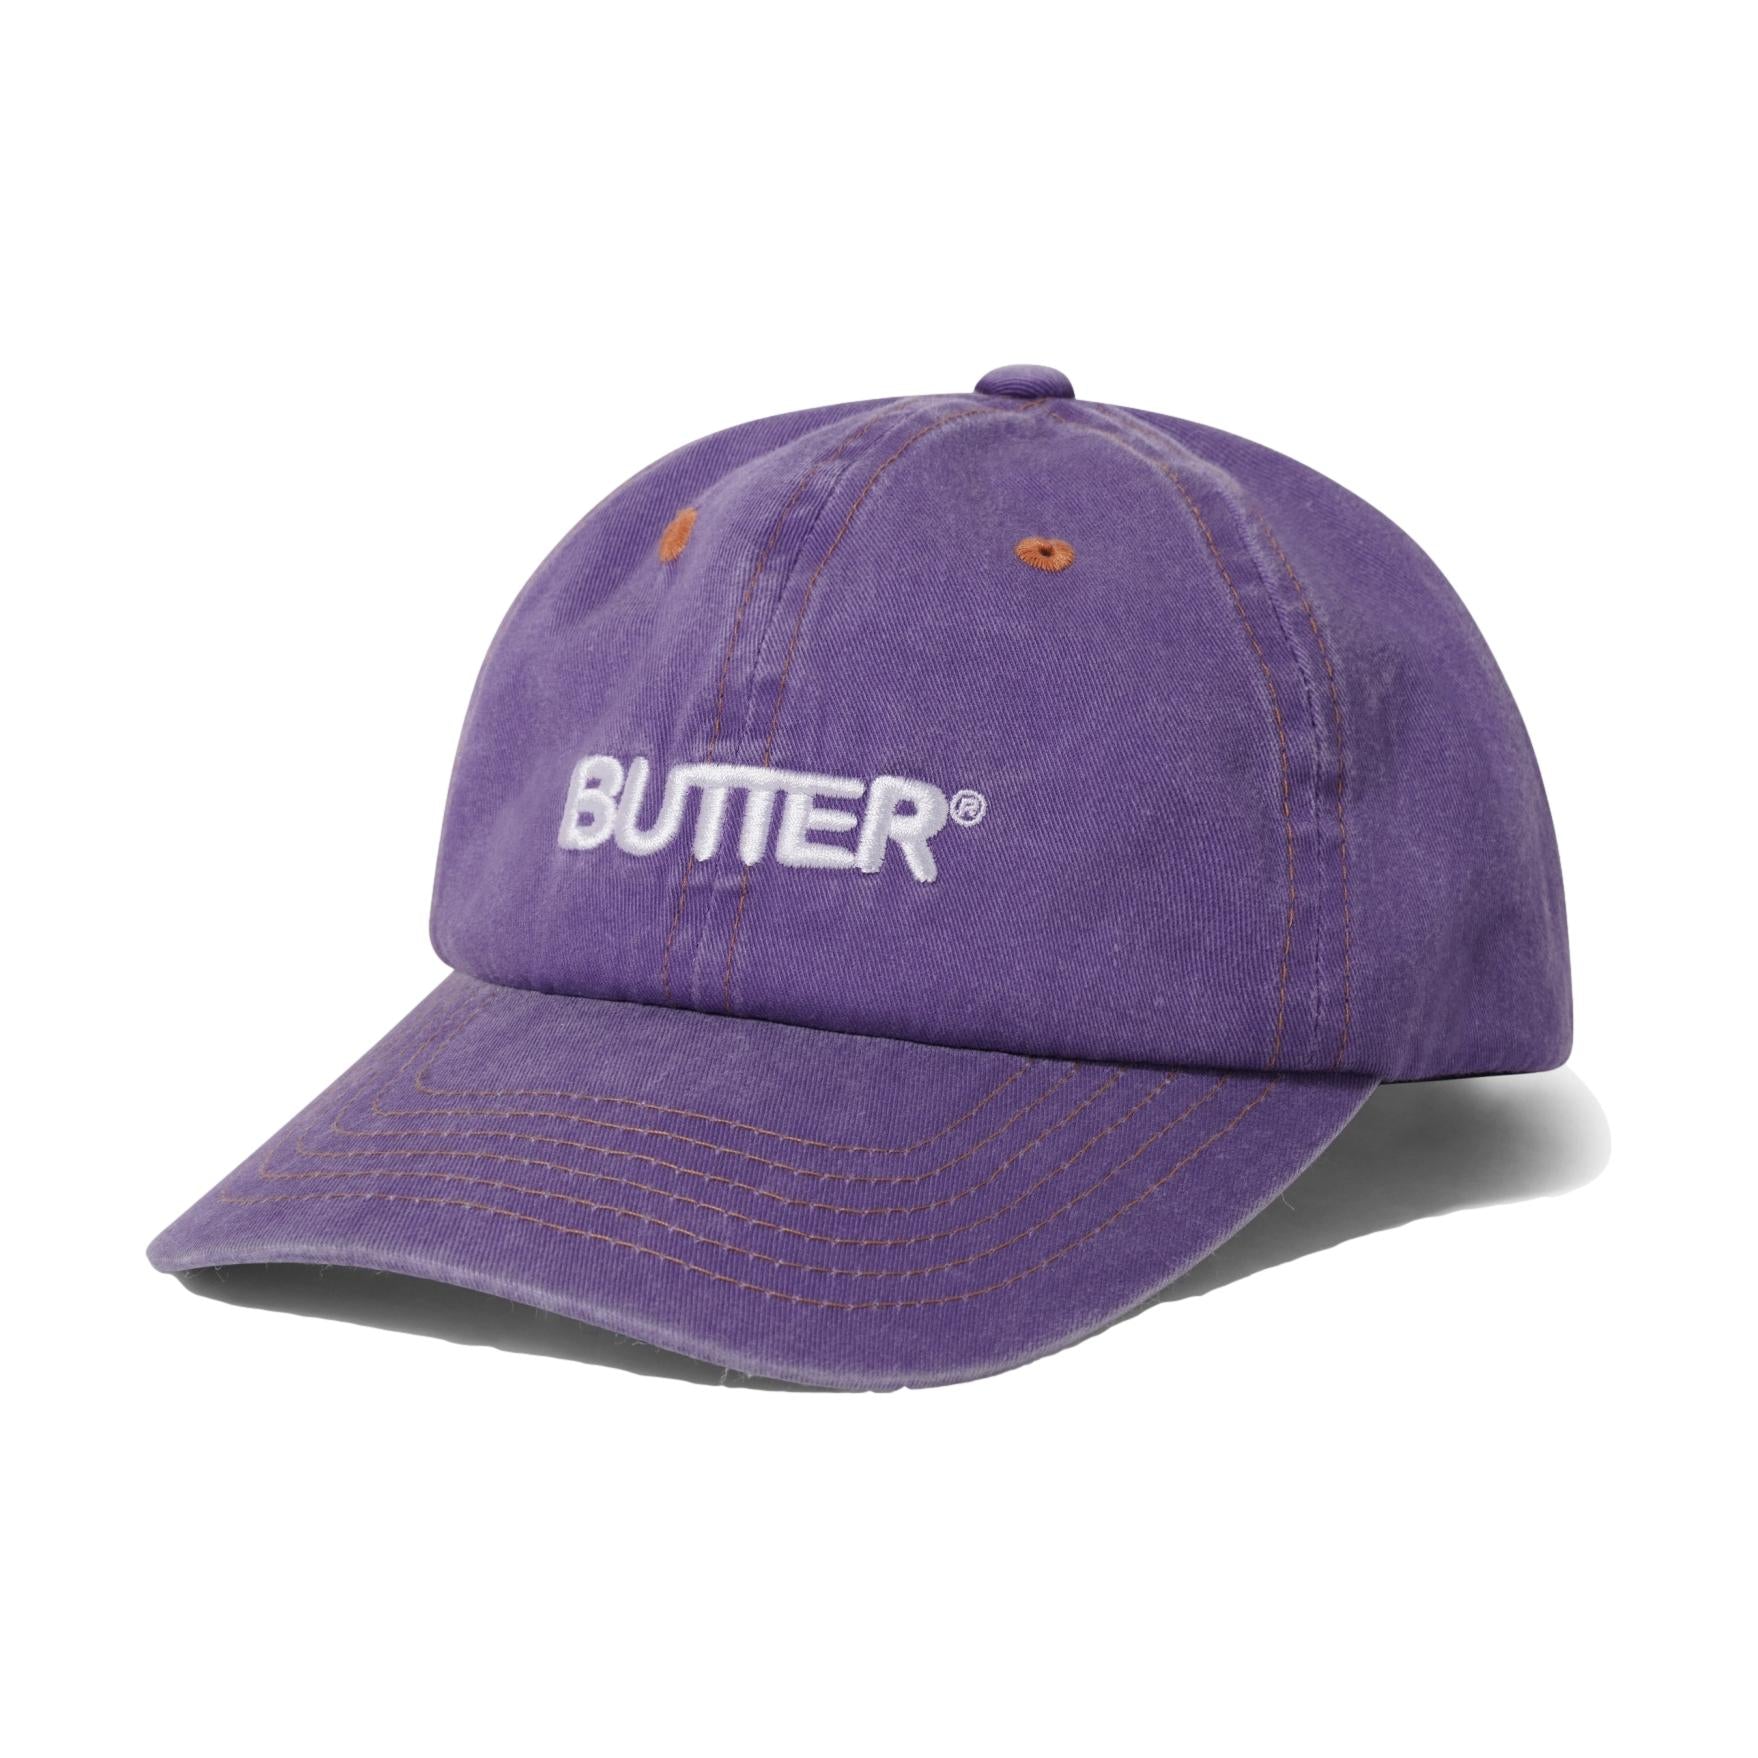 Butter Rounded 6 Panel Cap Washed Grape - Venue Skateboards